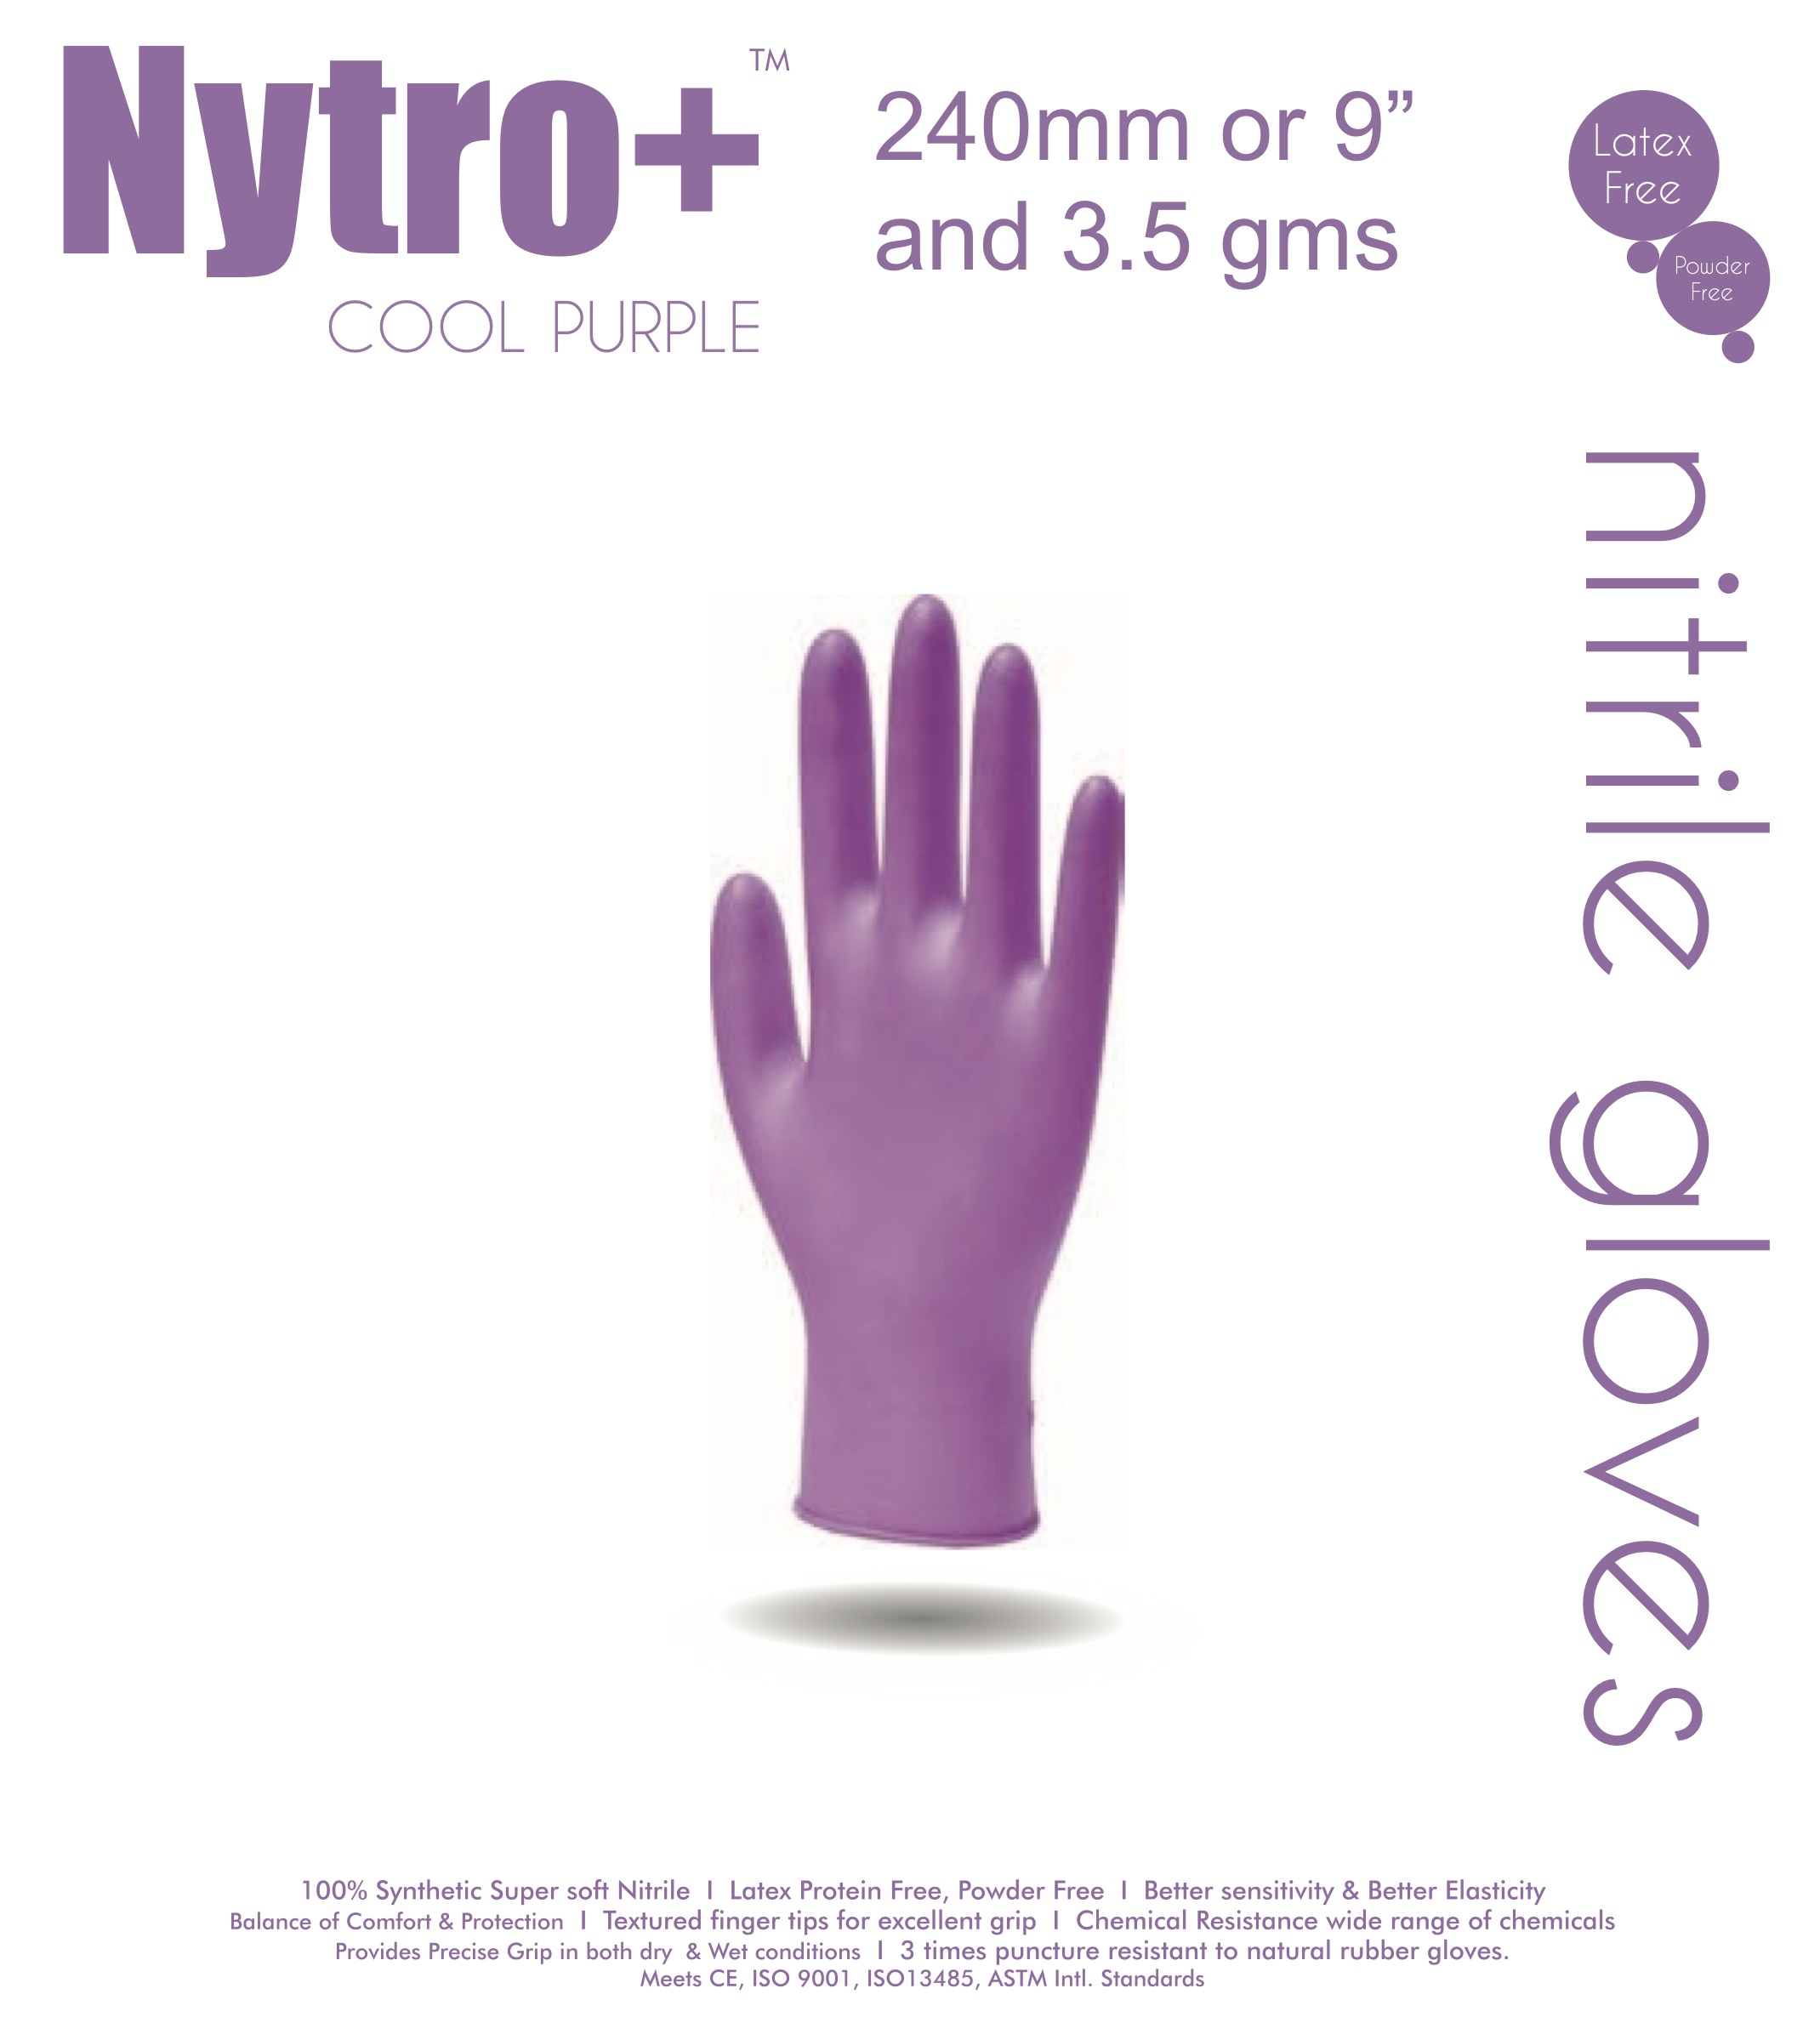 Nitrile Gloves Certified (Nytro+ Cool Purple Color) 607086/87/88